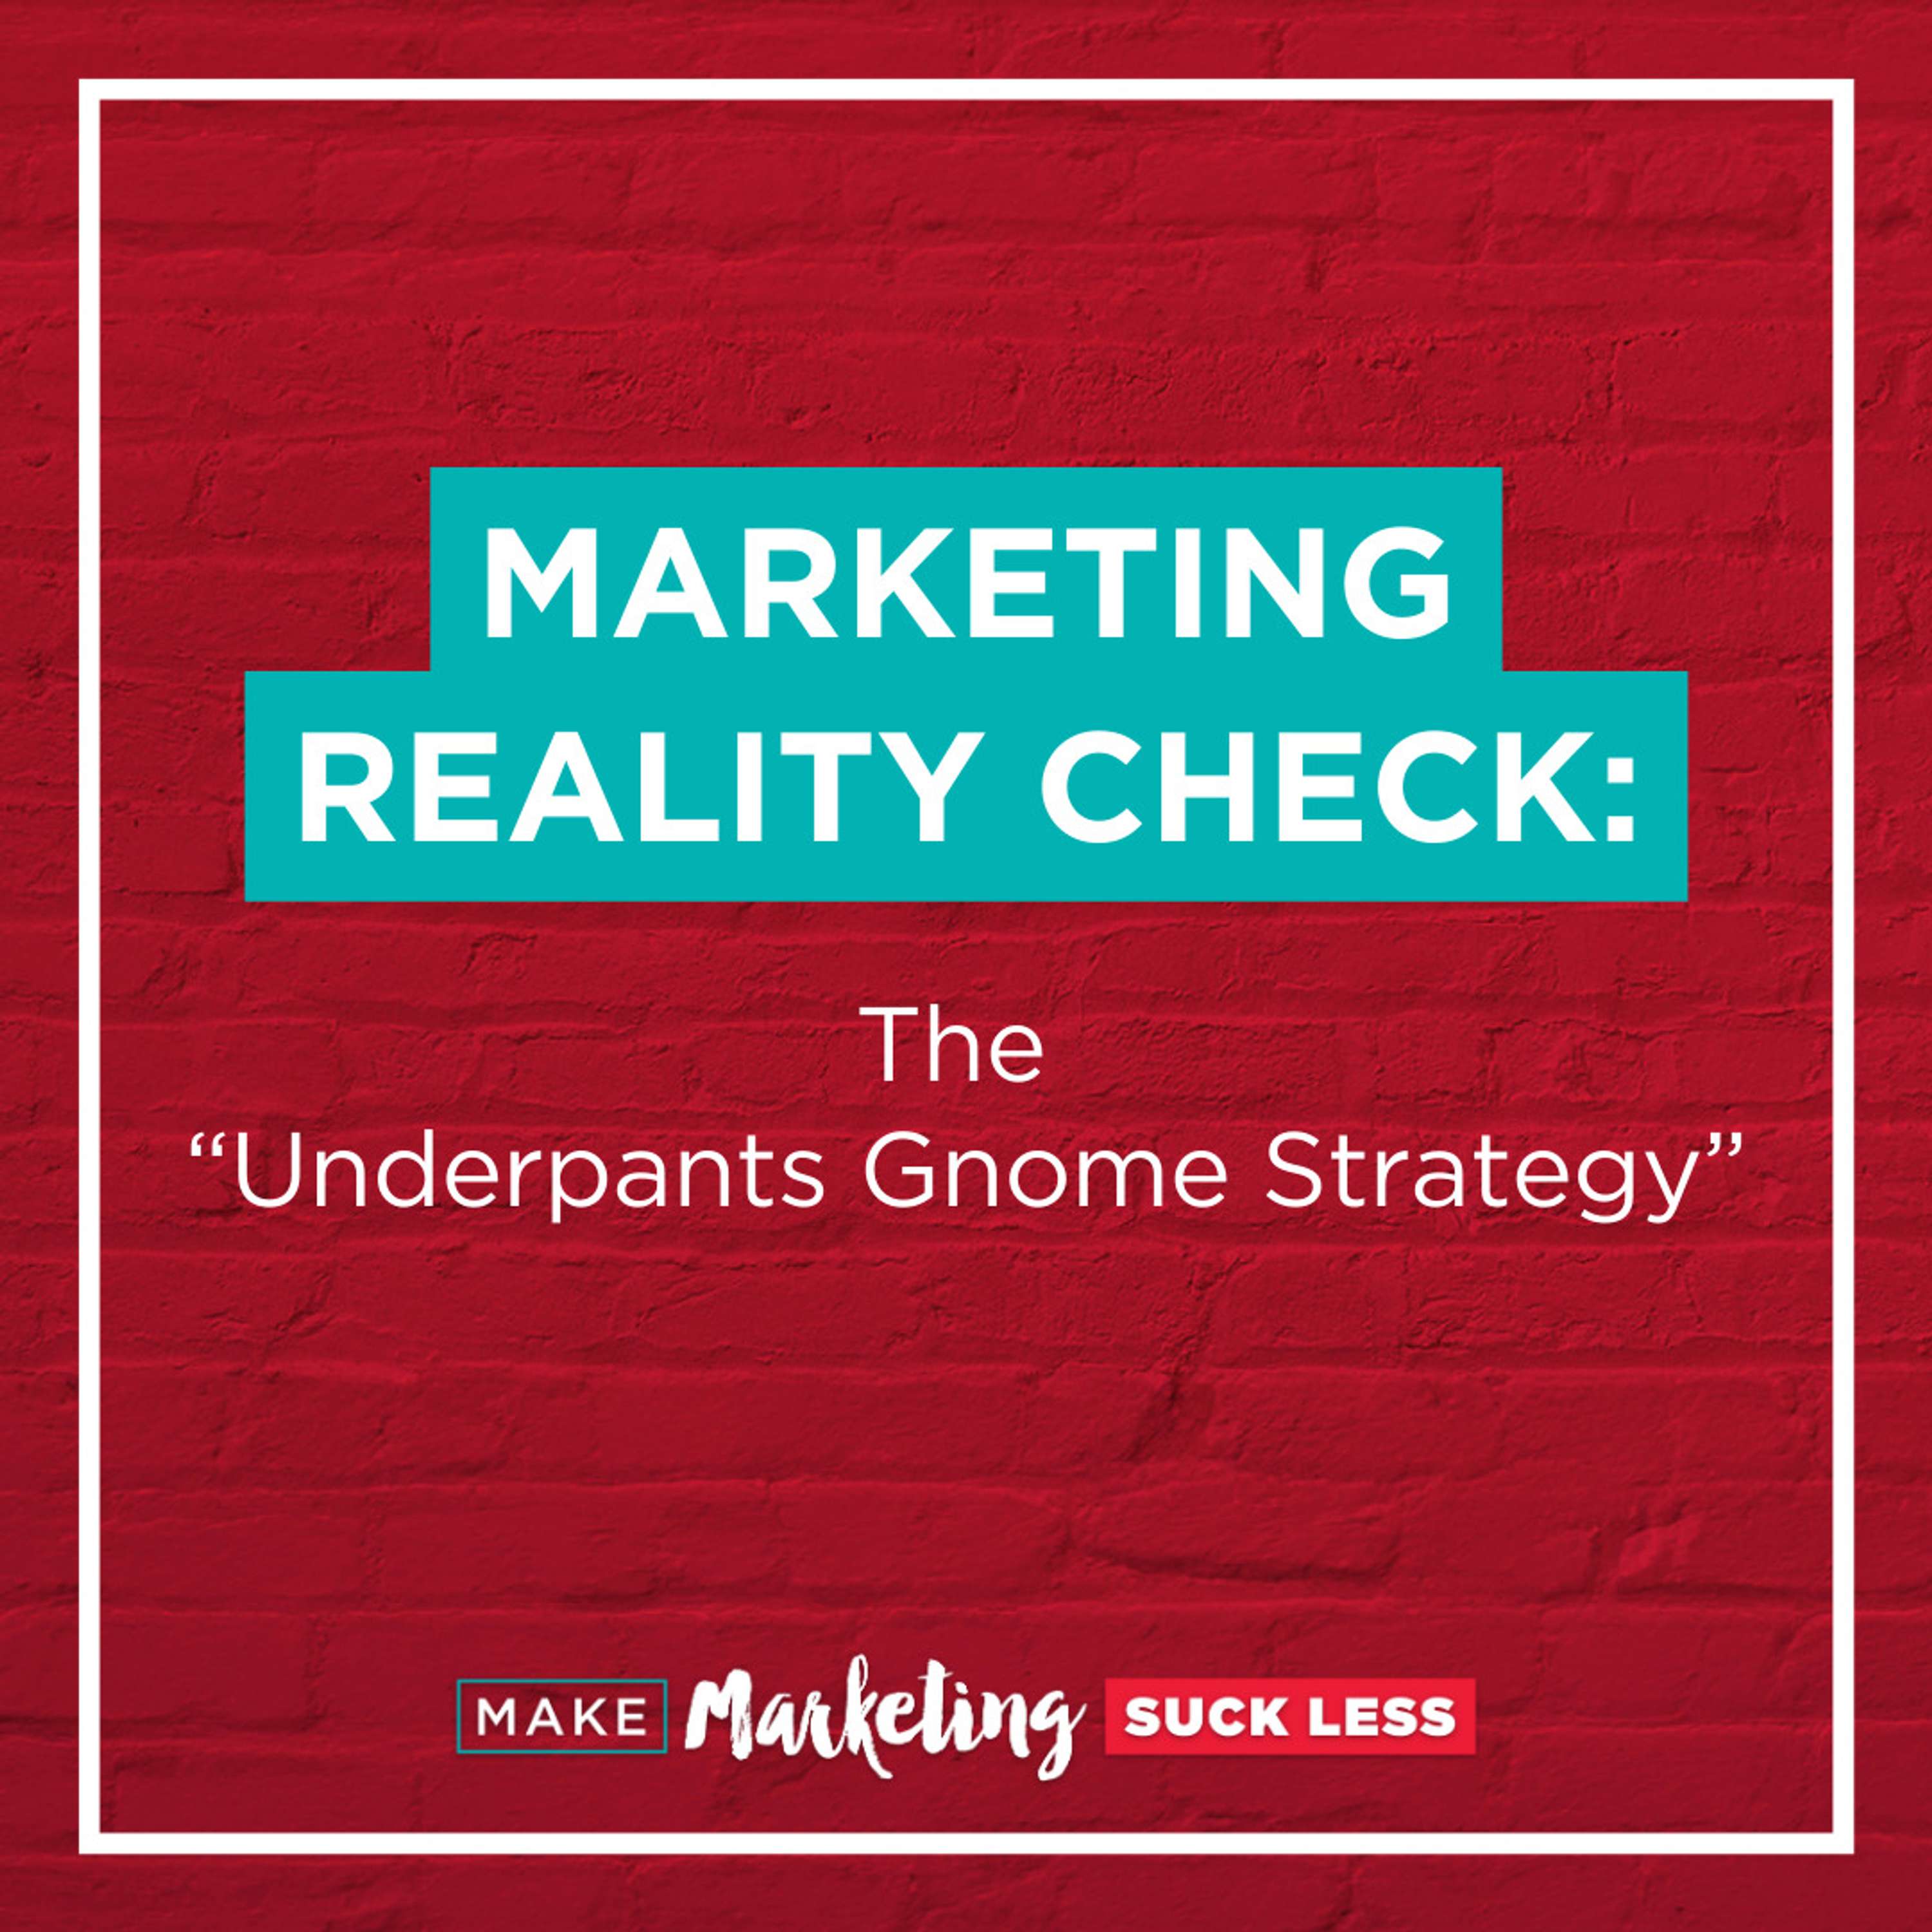 Marketing Reality Check: The “Underpants Gnome Strategy”